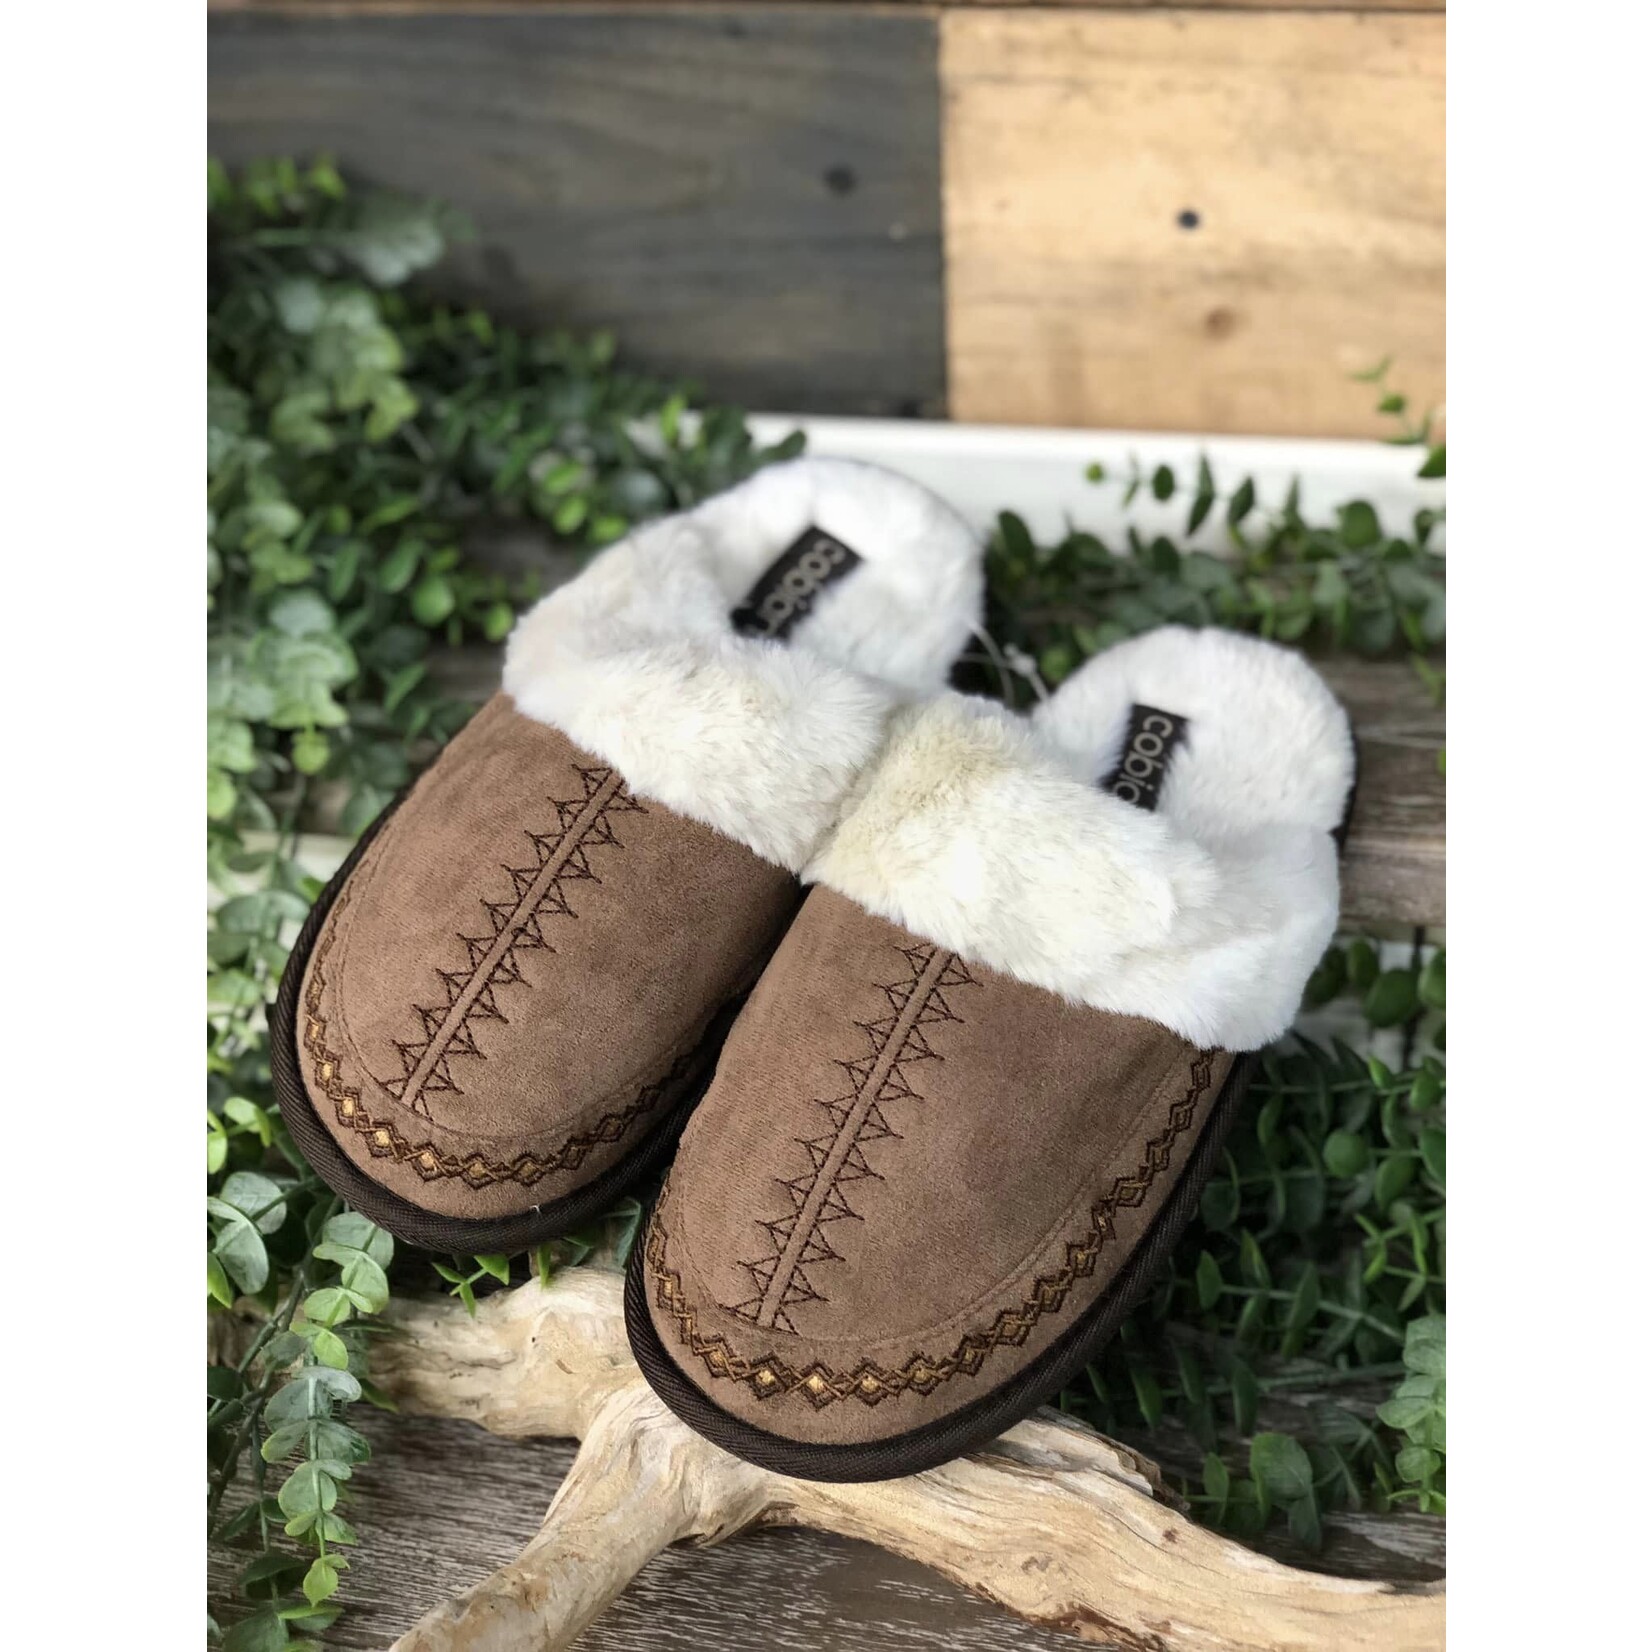 Cobian Cobian Women's Colima Mule House Slippers (COL21)